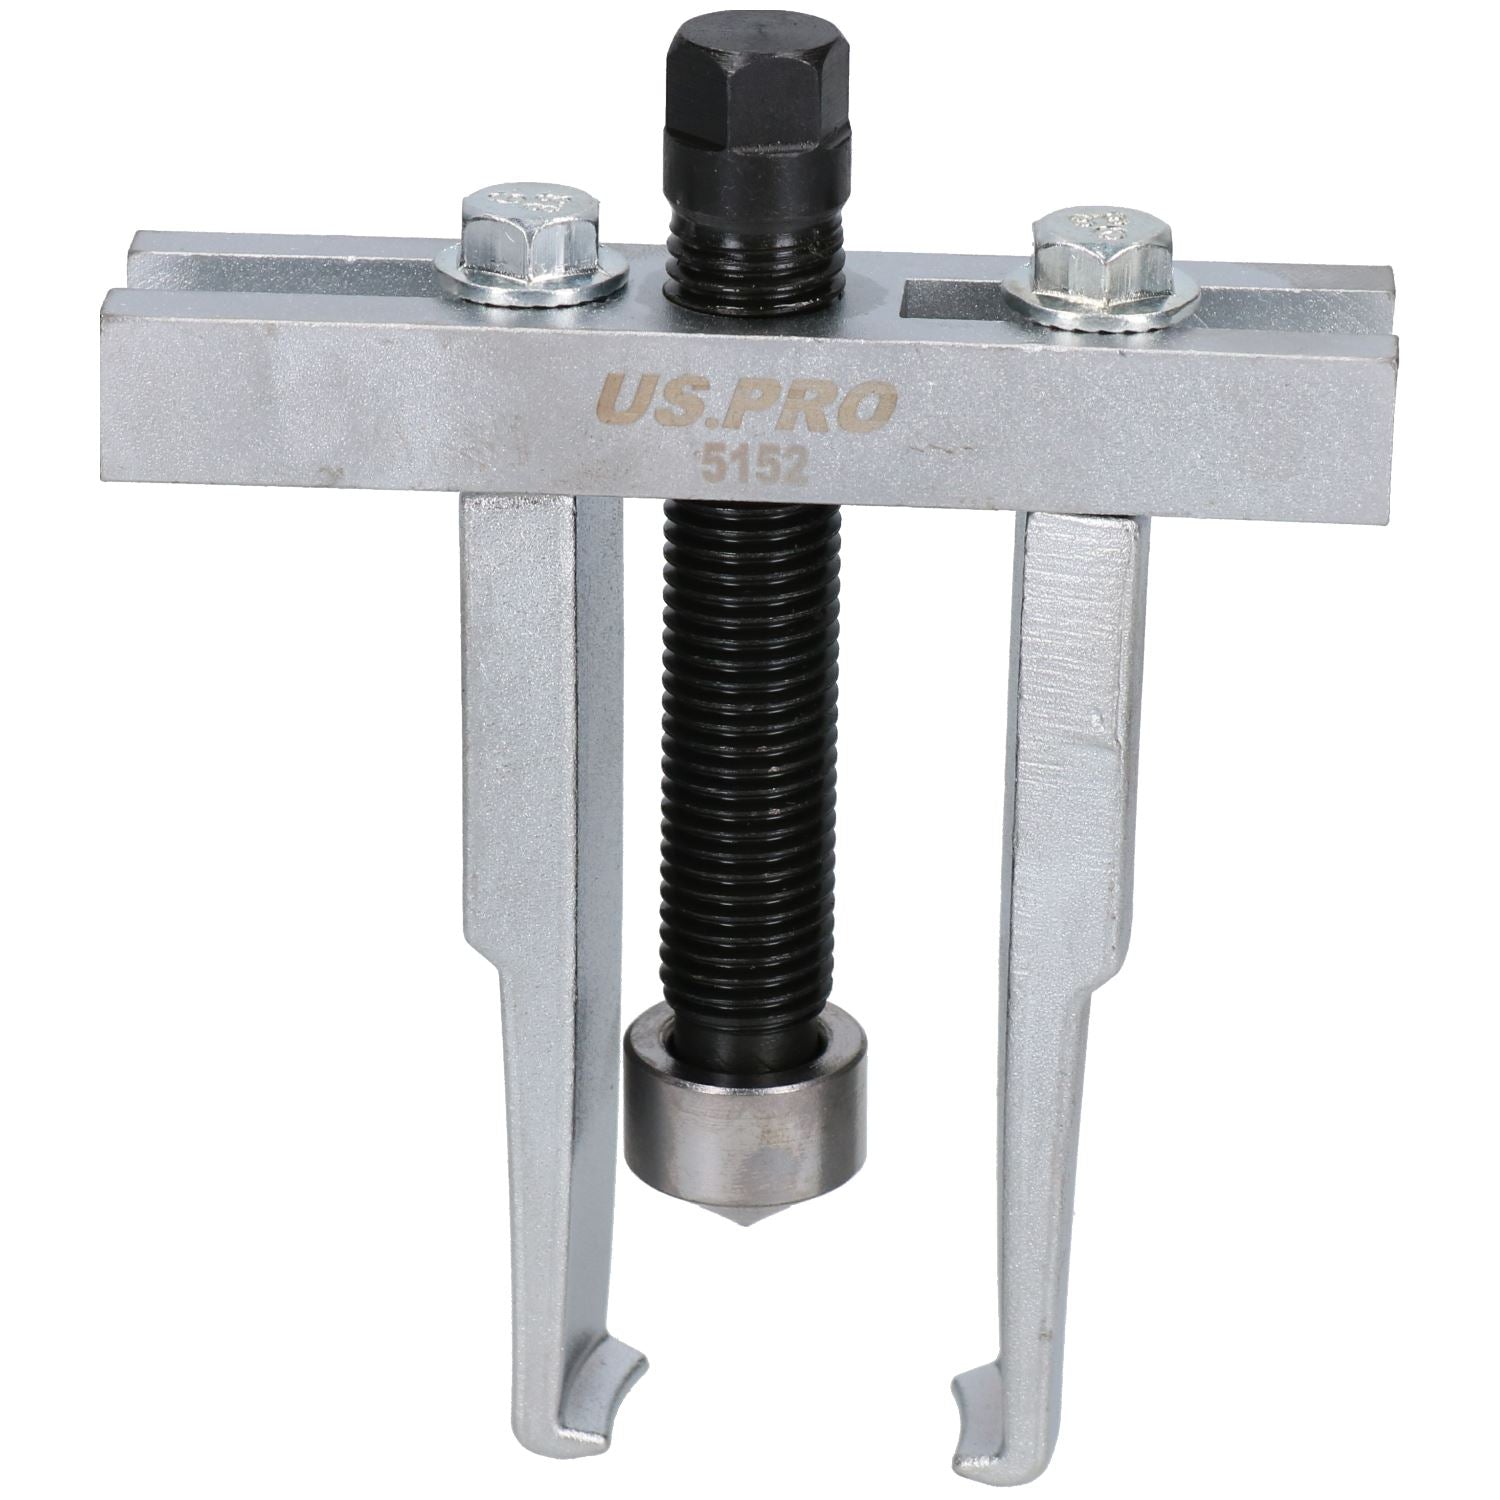 Thin two jaw bearing puller / remover 30mm - 90mm by U.S.PRO TOOLS AT091